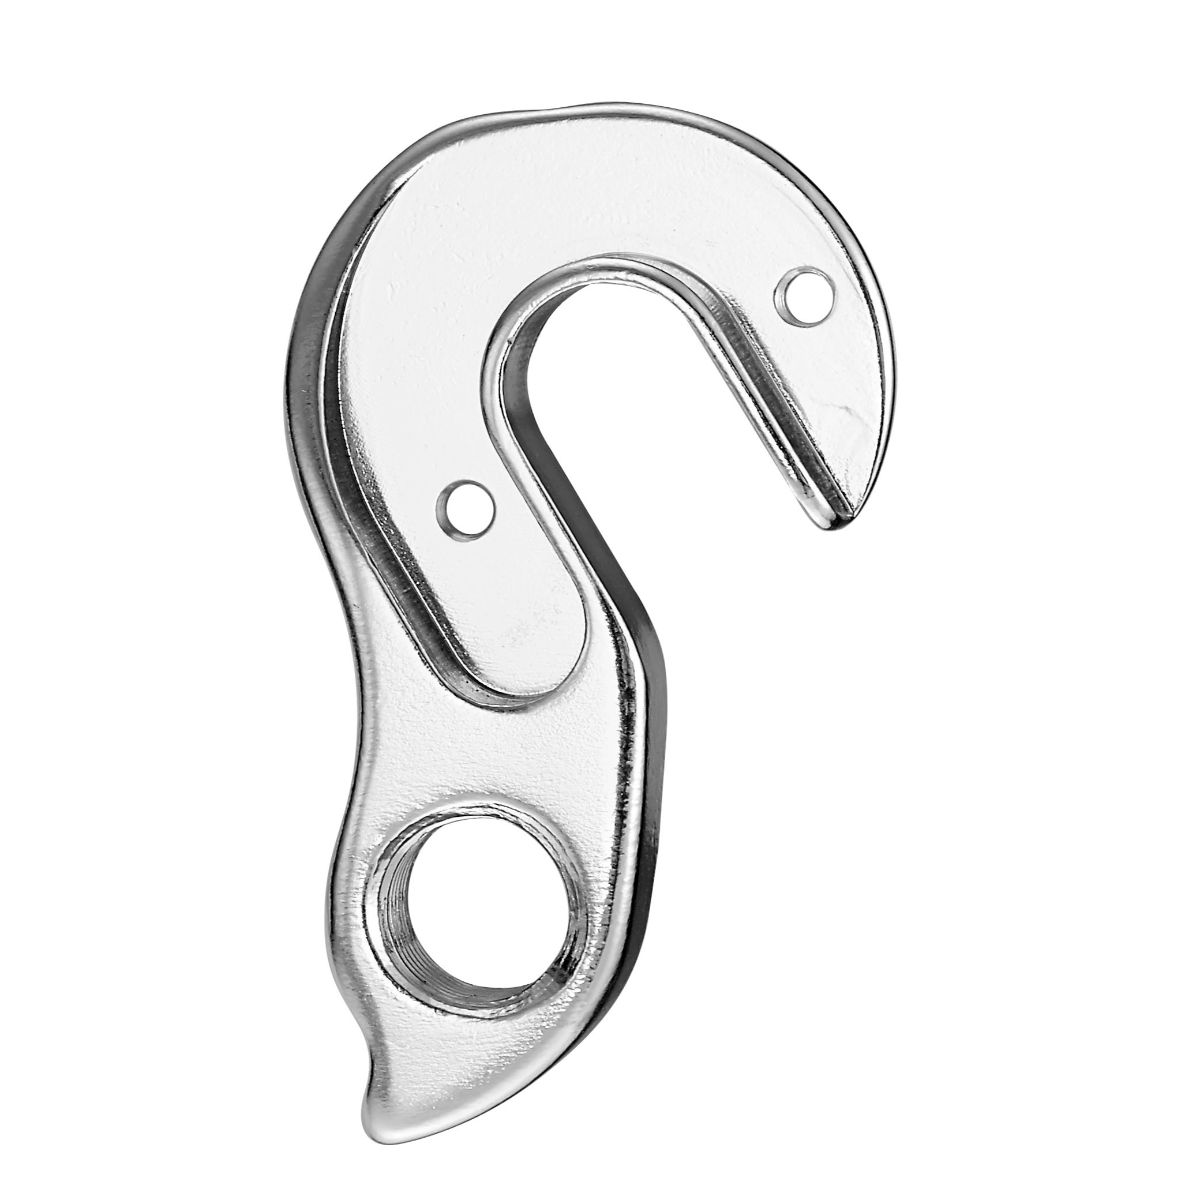 Marwi UNION GH-143 derailleur hanger for Specialized, S-Works